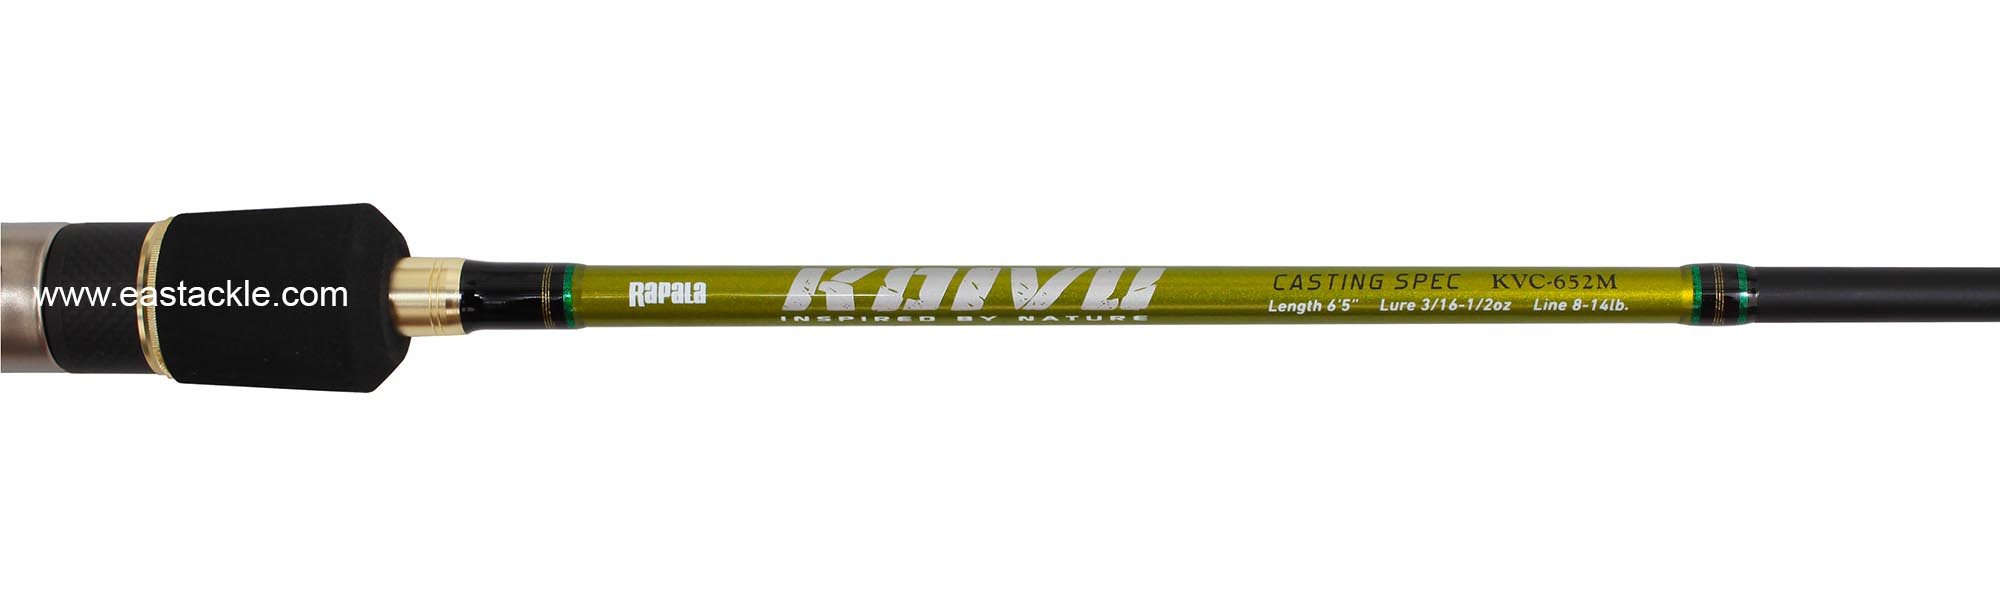 Rapala - Koivu - KVC652M - Bait Casting Rod - Blank Specifications (Top View) | Eastackle